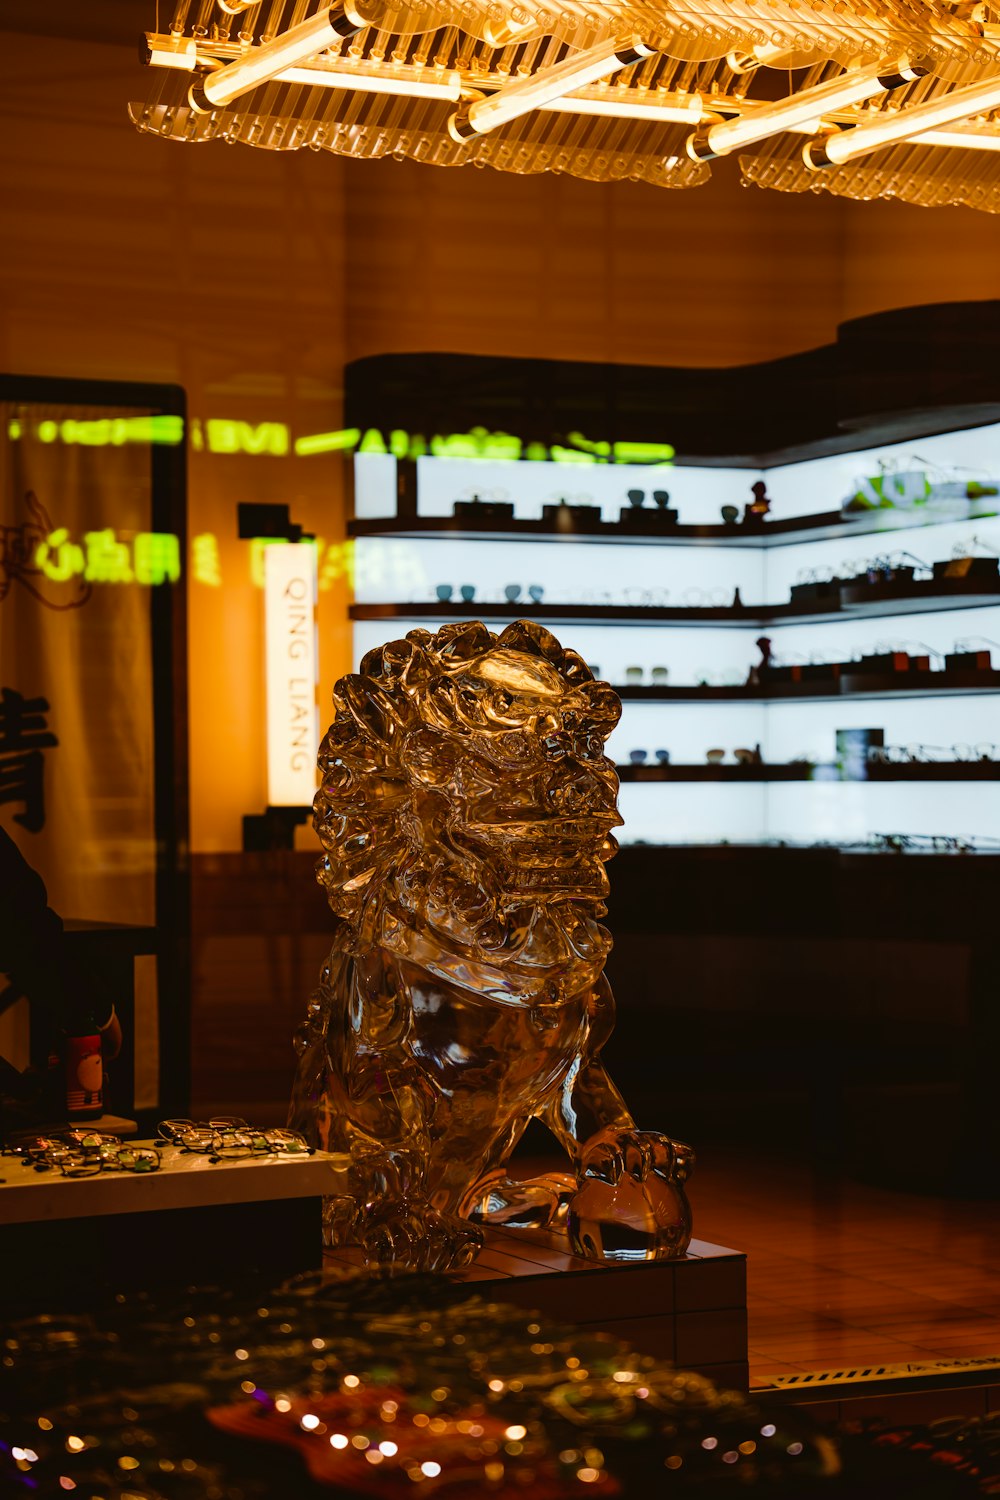 a glass sculpture of a lion in a store